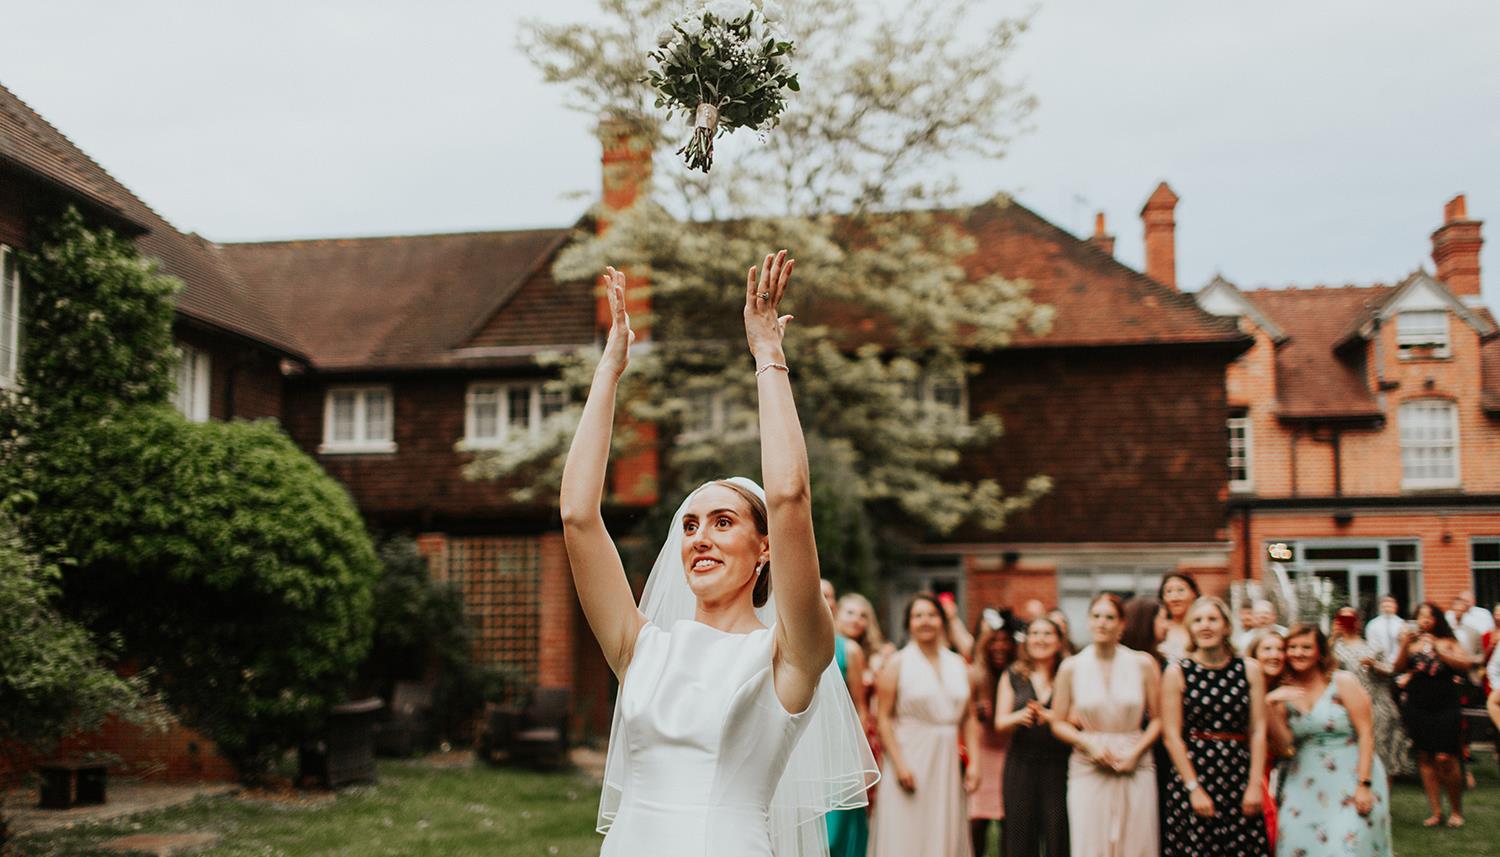 Throwing the bouquet. Photo Credit: Oxana Mazur Photography